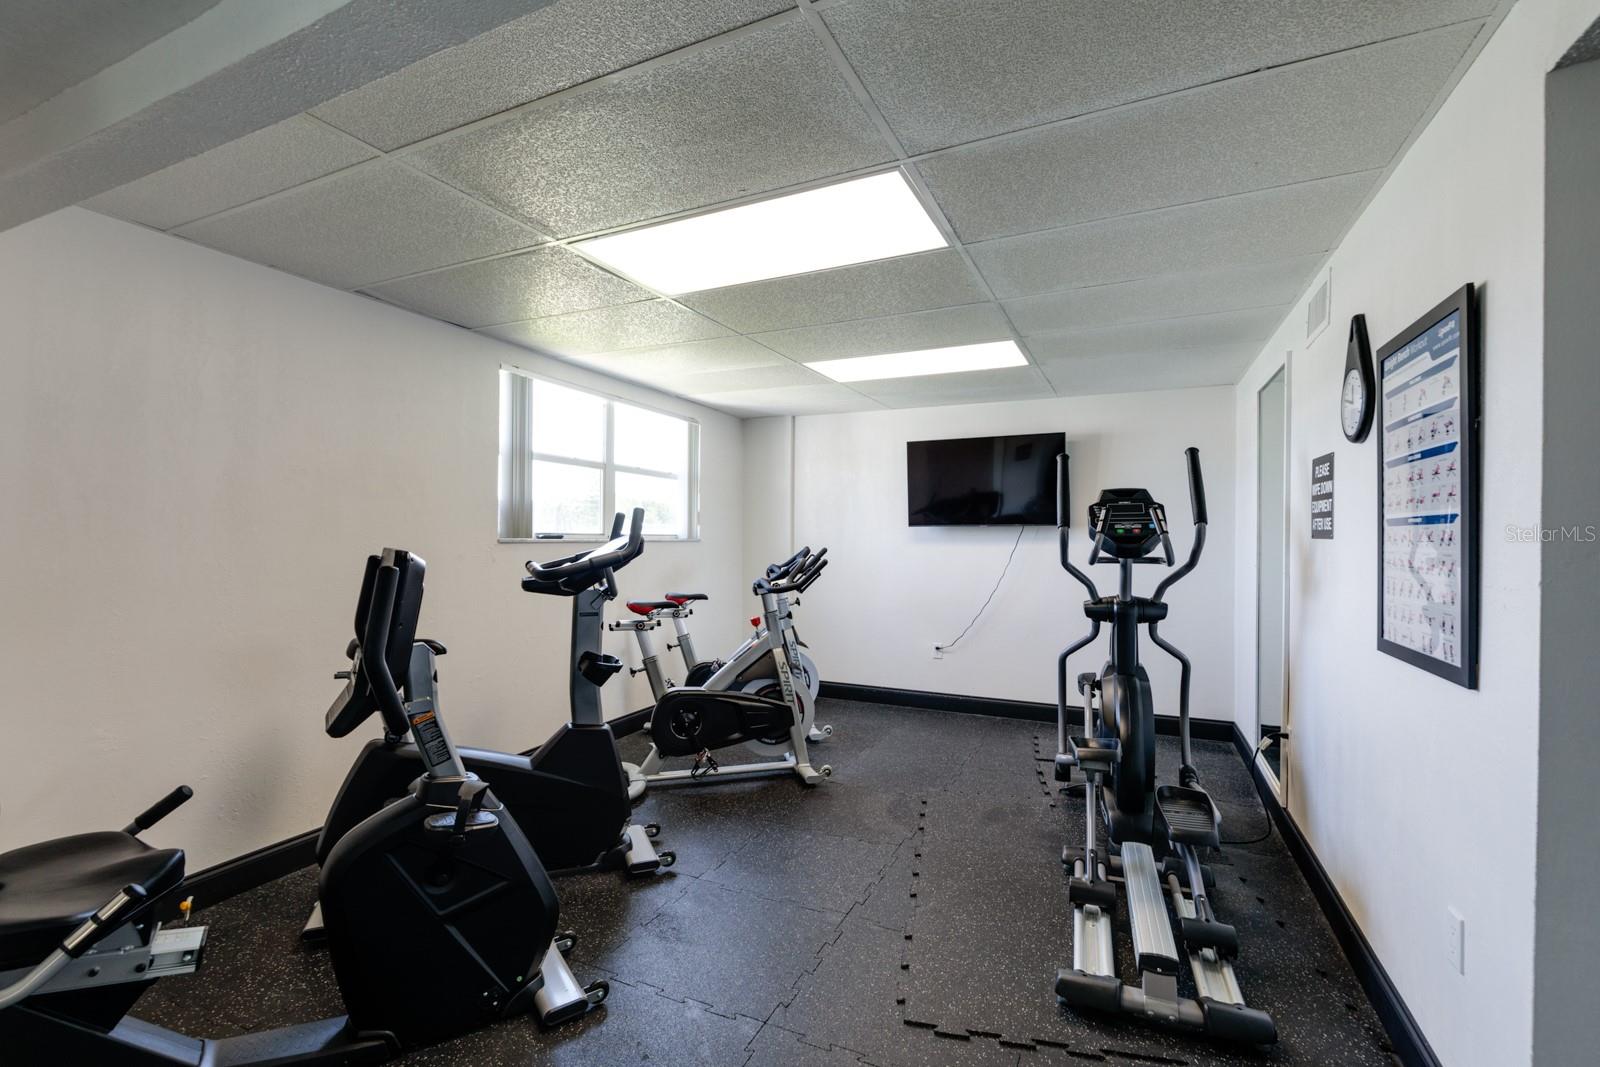 WORKOUT FACILITIES - 4 ROOMS